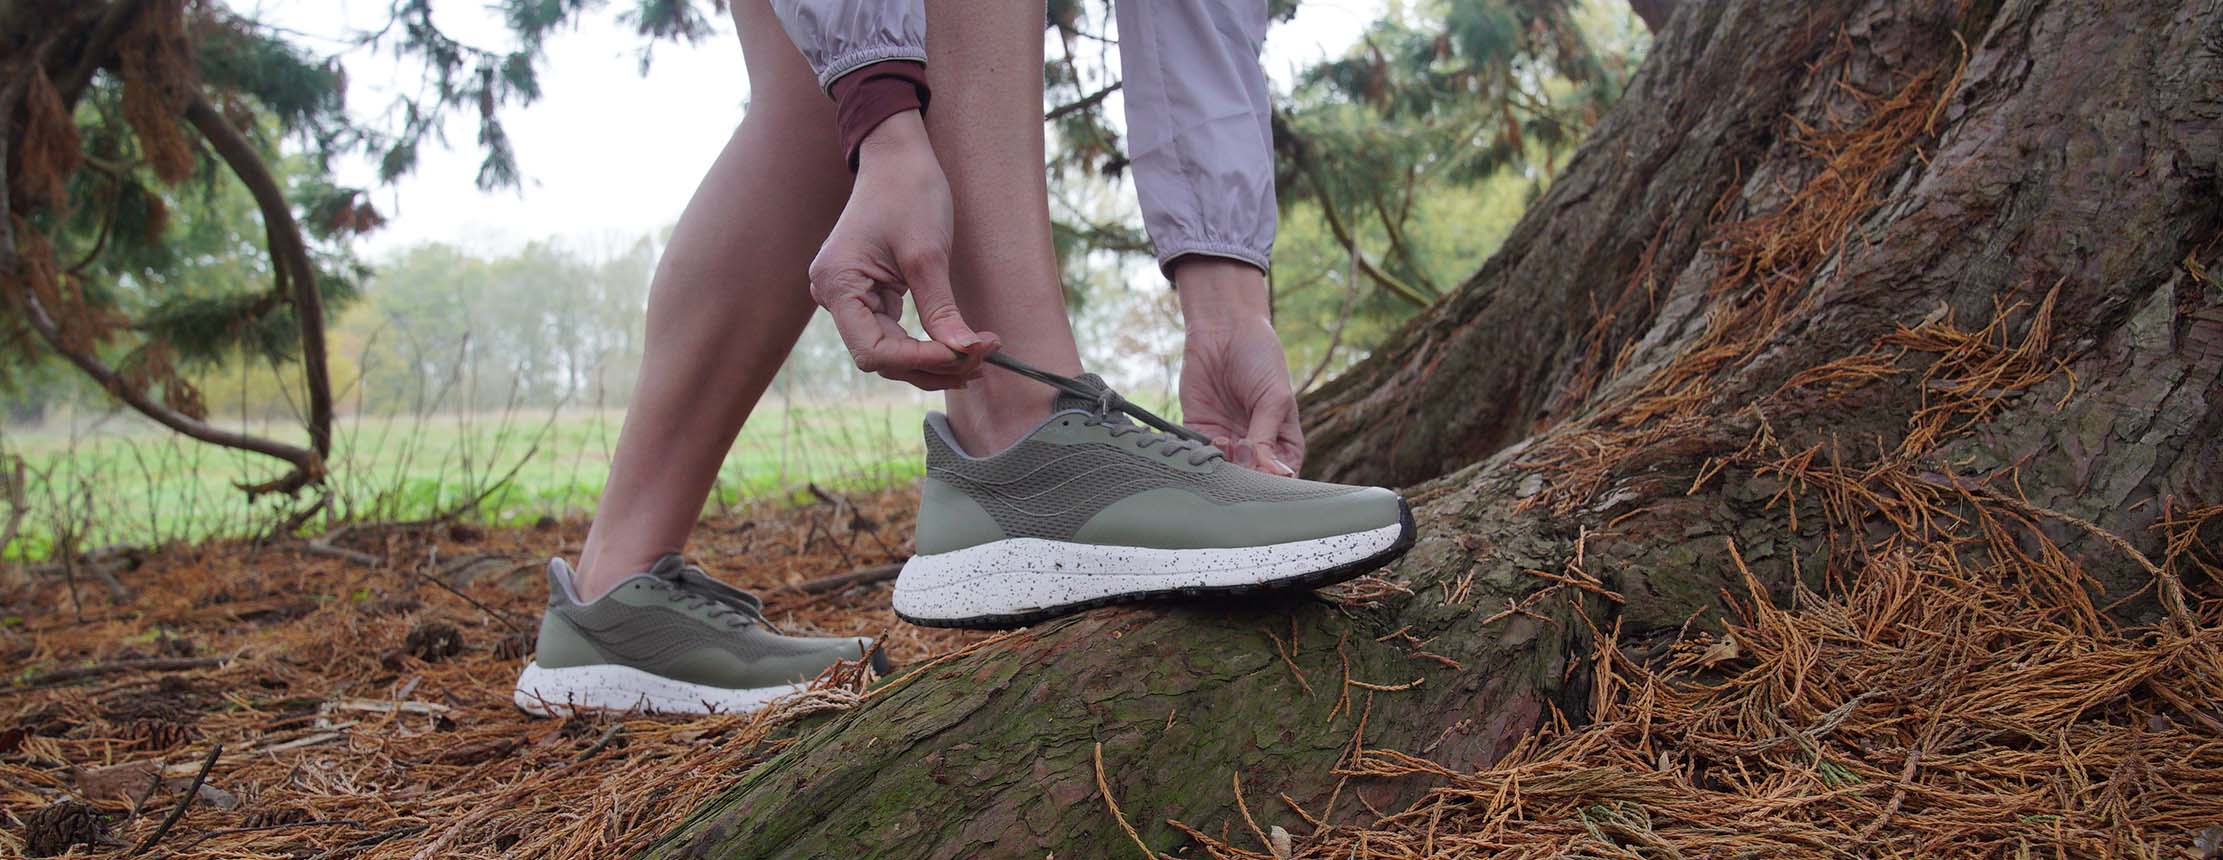 Runner ties laces by a tree